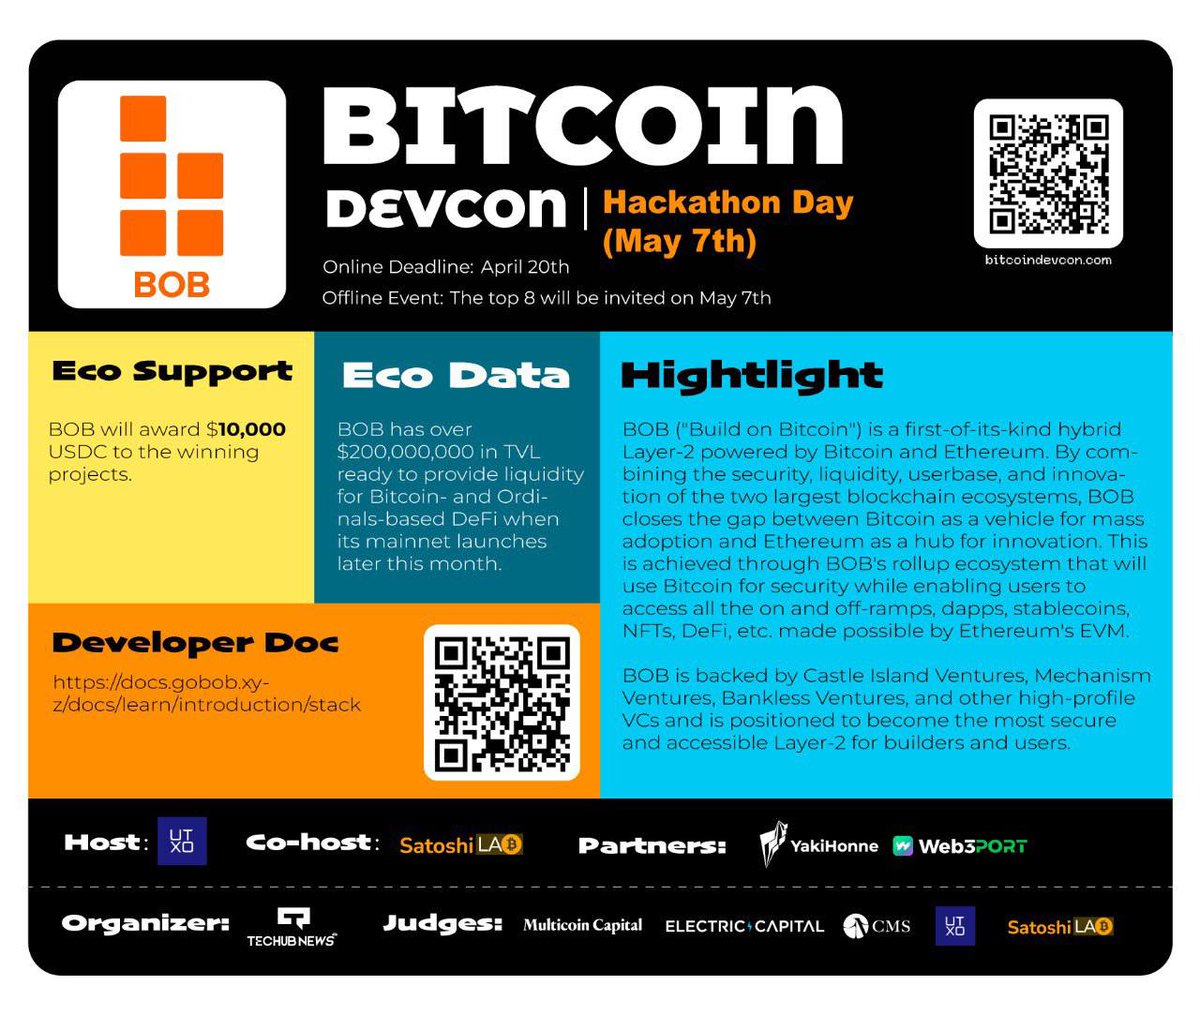 BOB to sponsor the #Devcon Hackathon in Hong Kong. 🥇 Offering $10,000 USDC to innovative projects excelling in BTC L2 tech. Submit online by April 20th. Relevant links below. 🔻🔗